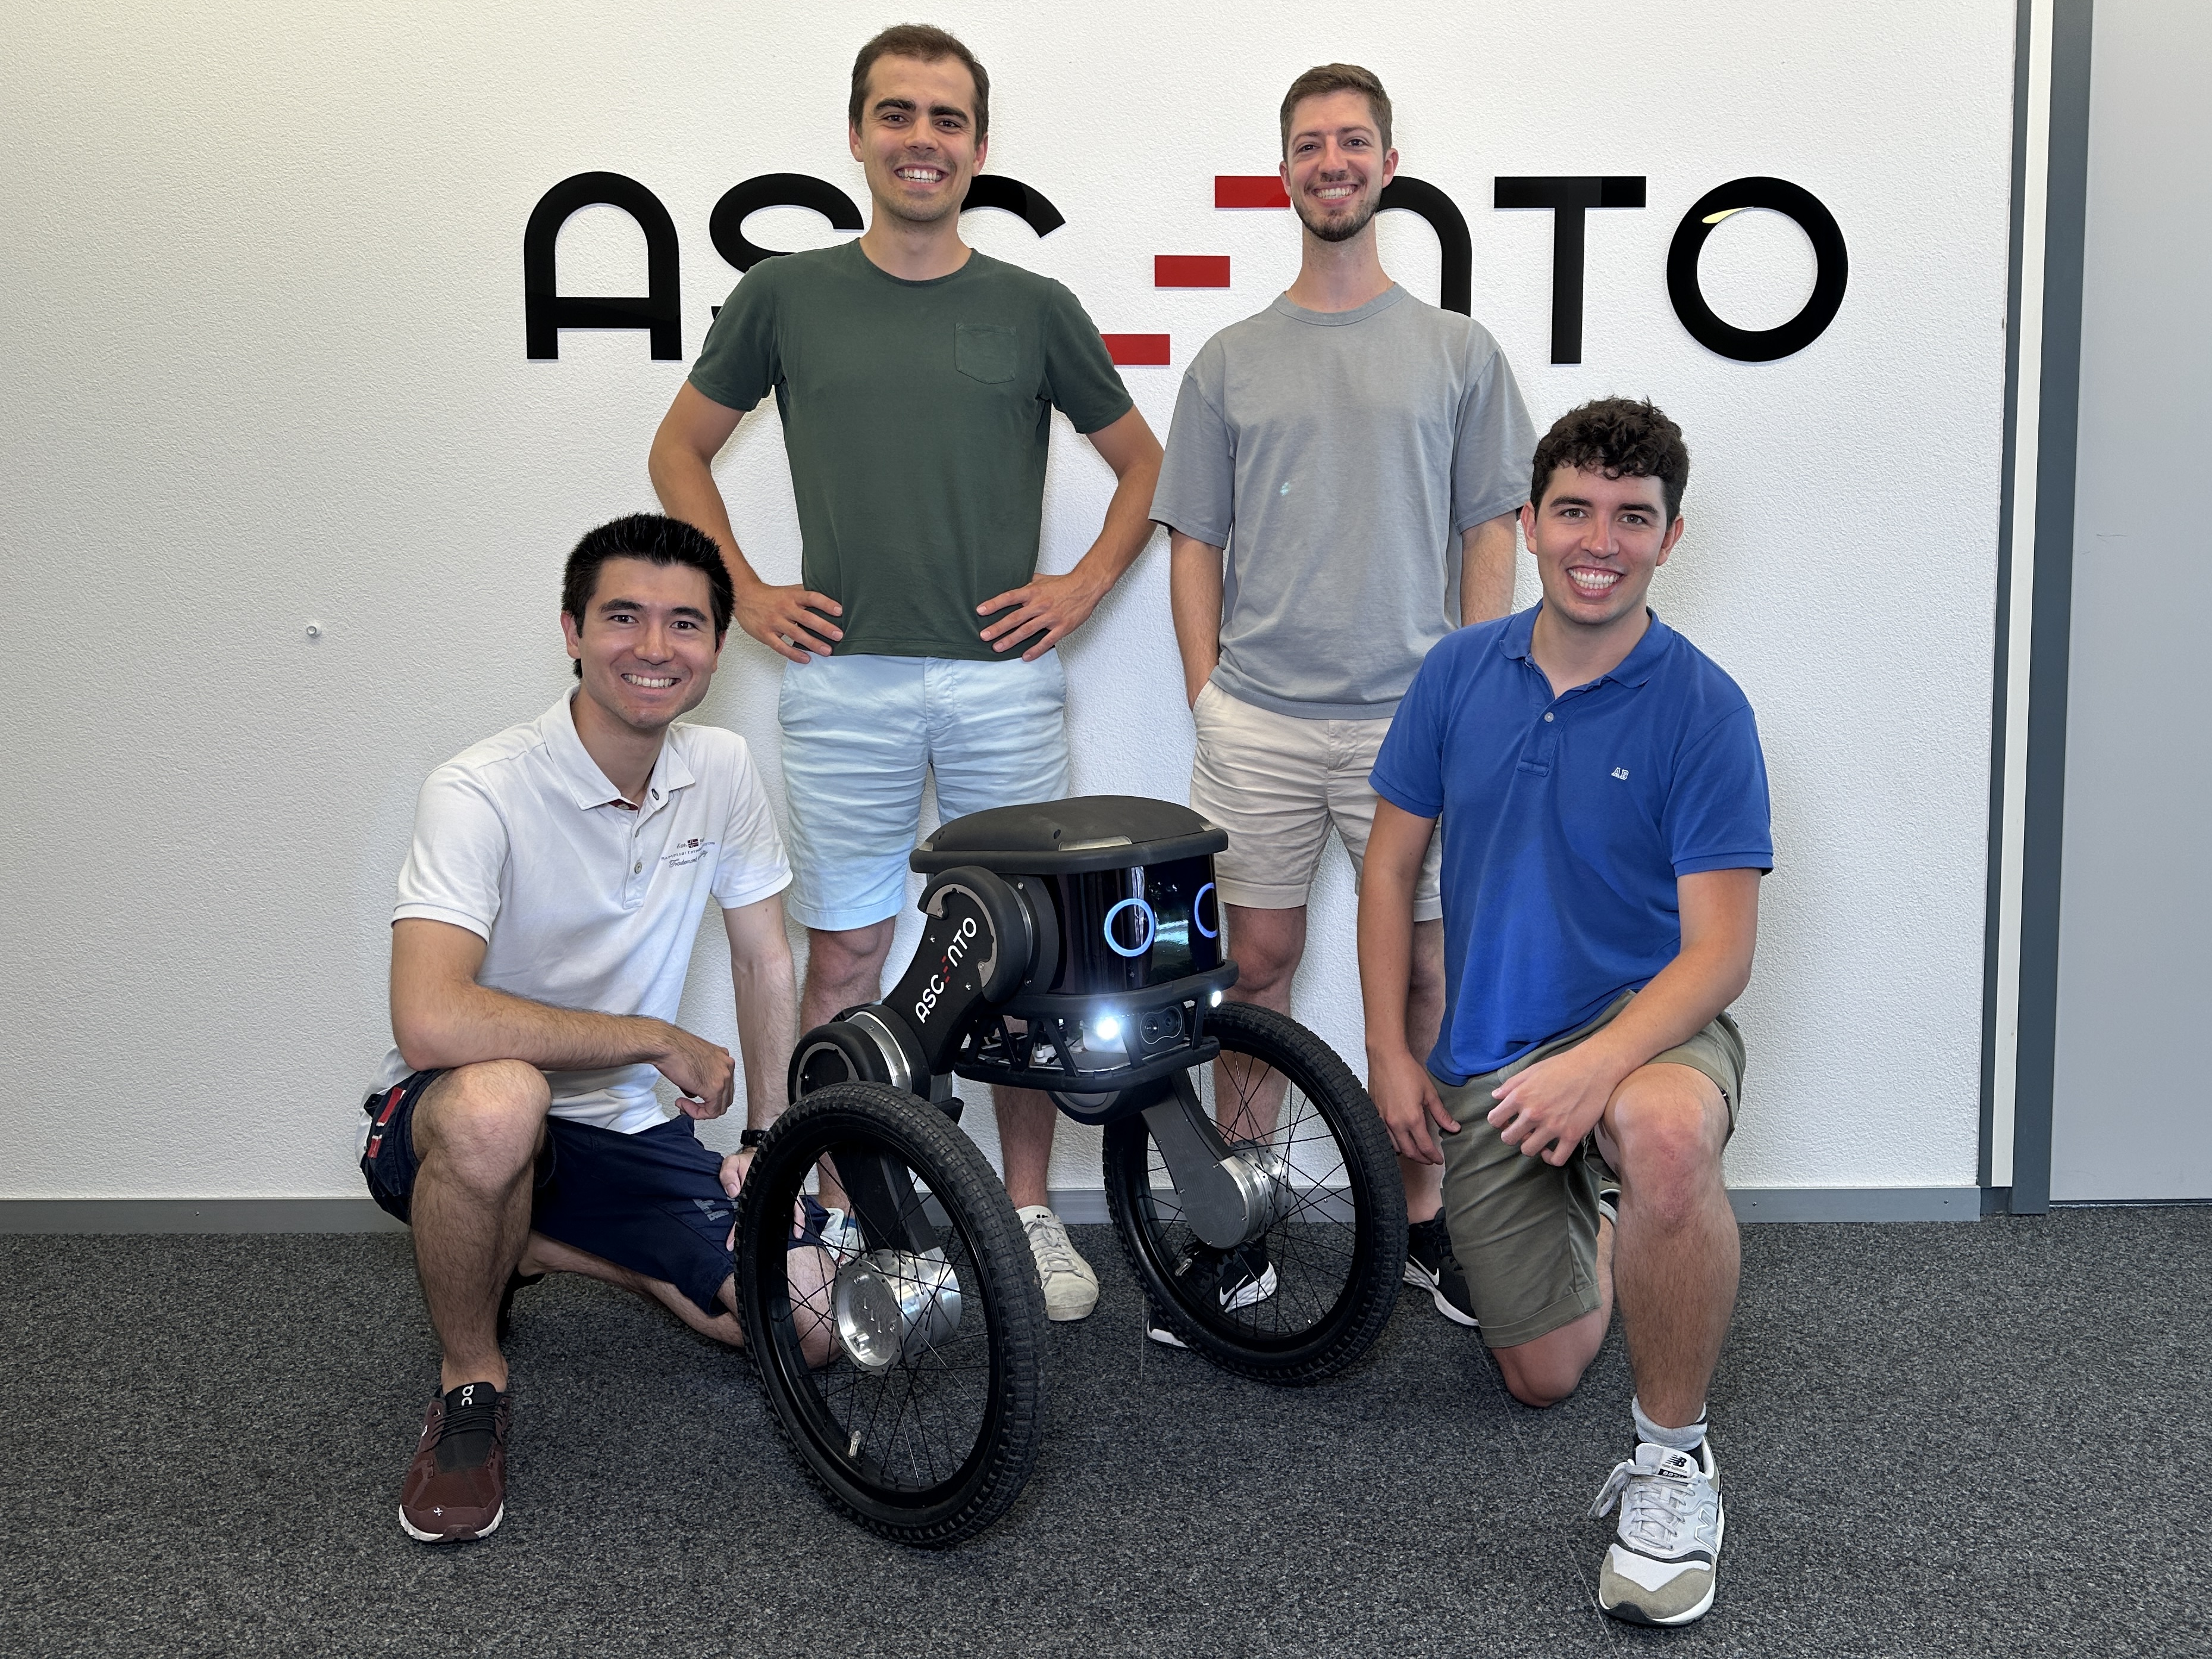 The Ascento Guard flanked by its founders: (L to R) Dominik Mannhart, Alessandro Morra, Ciro Salzmann and Miguel de la Iglesia Valls.